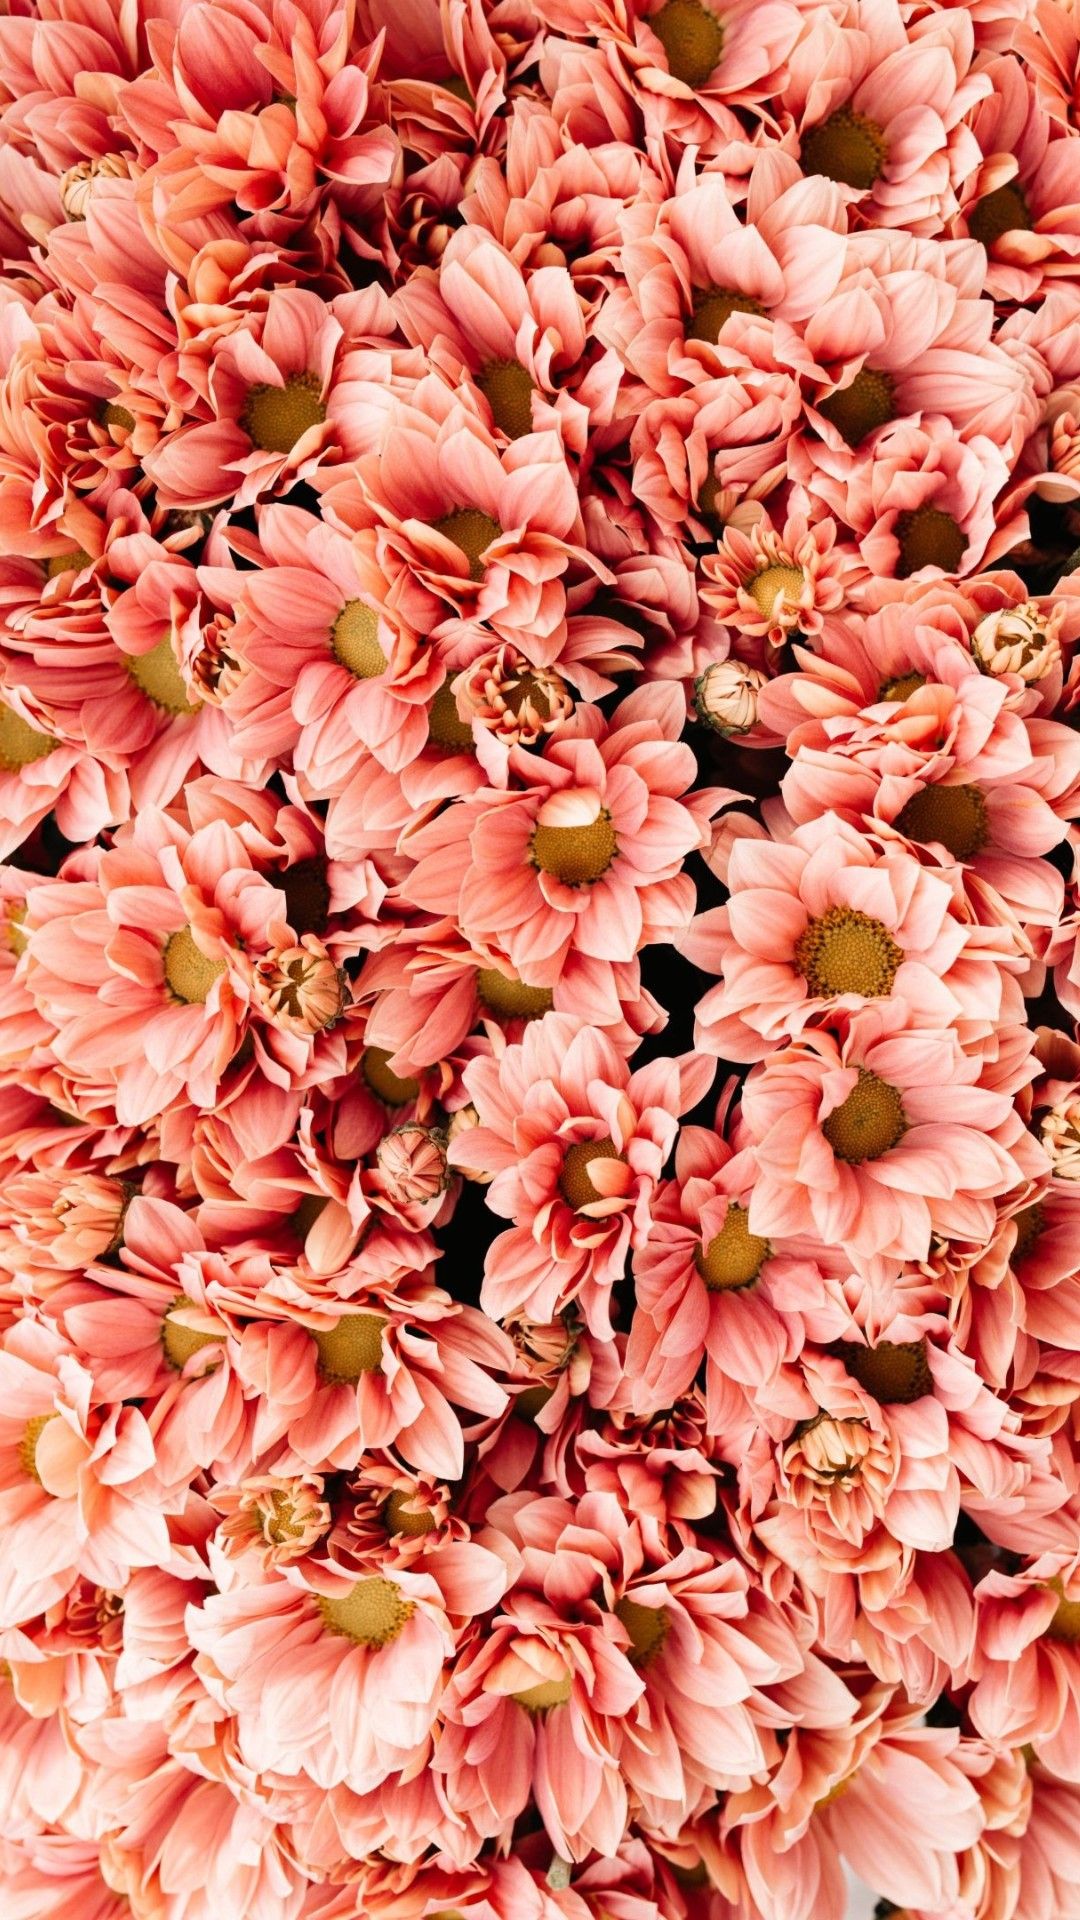 A close up of some pink flowers - Salmon, coral